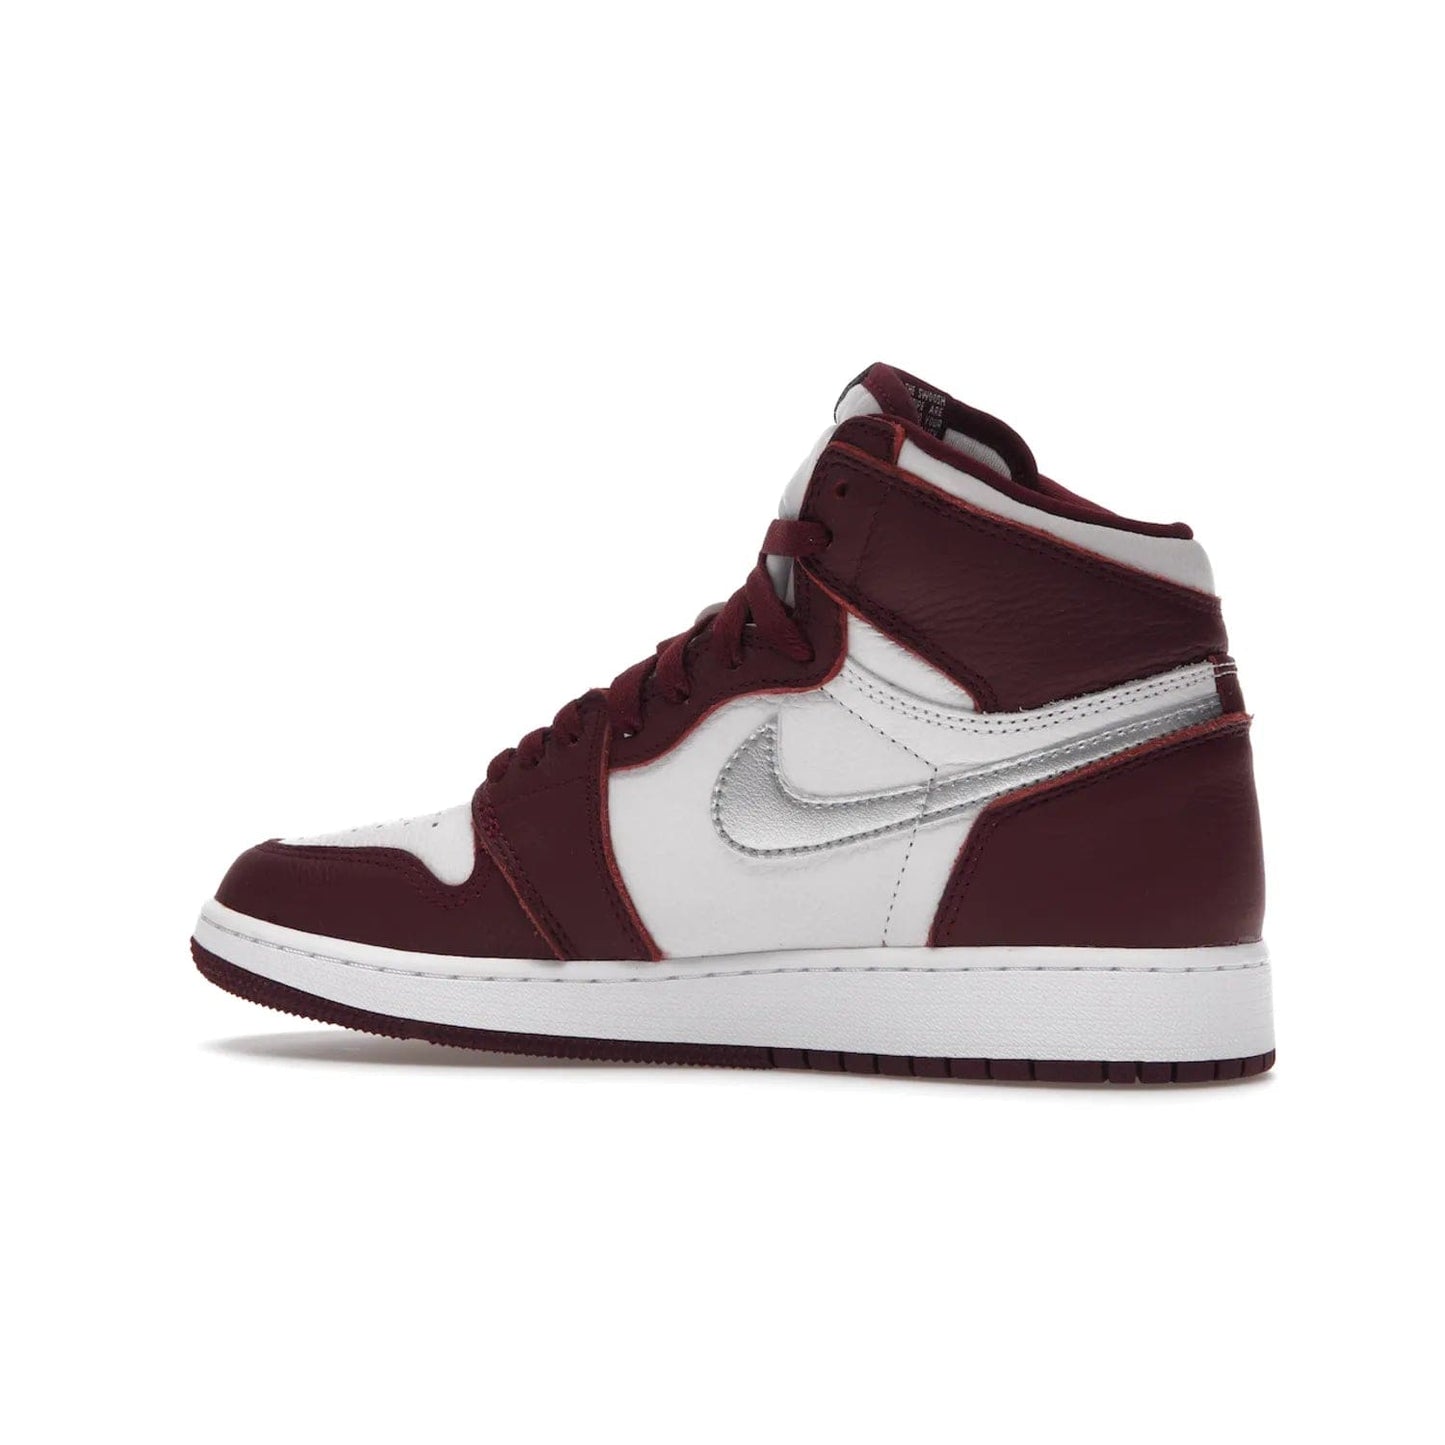 Jordan 1 Retro High OG Bordeaux (GS) - Image 21 - Only at www.BallersClubKickz.com - #
Introducing the Air Jordan 1 Retro High OG Bordeaux GS – a signature colorway part of the Jordan Brand Fall 2021 lineup. White leather upper & Bordeaux overlays, metallic silver swoosh, jeweled Air Jordan Wings logo & more. Step up your style game with this sleek fall season silhouette.